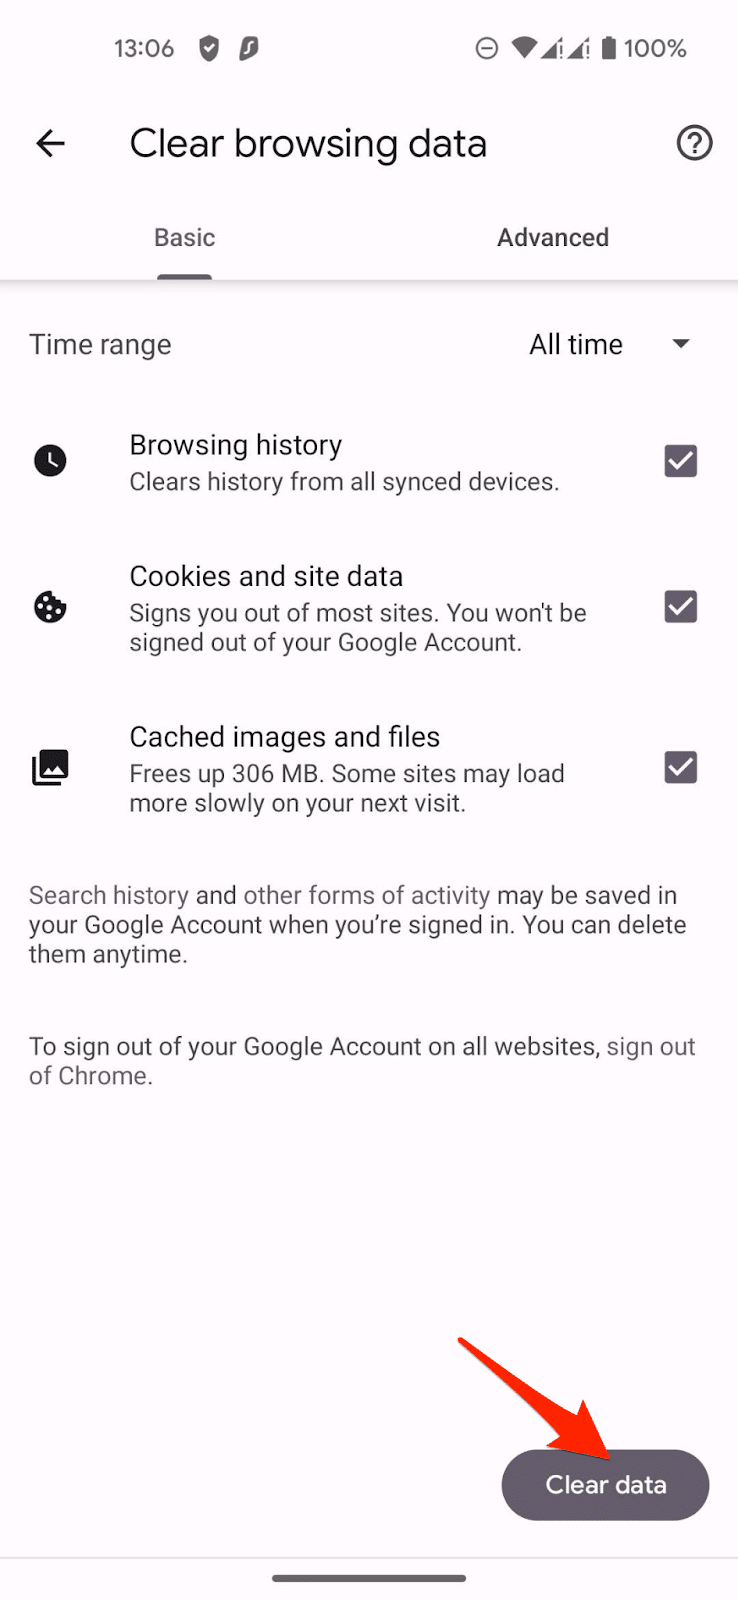 Tap the "Clear data" button